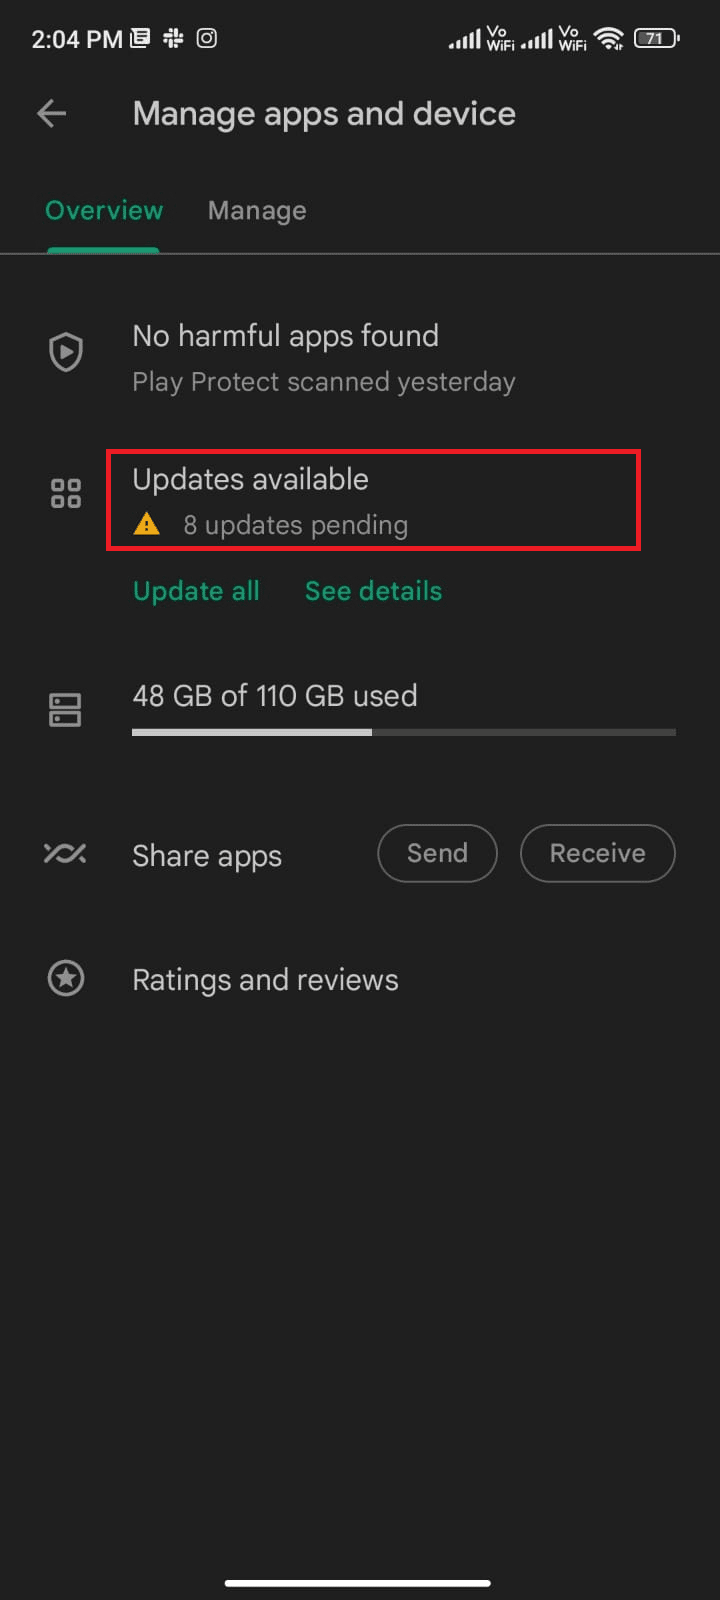 tap on Updates available